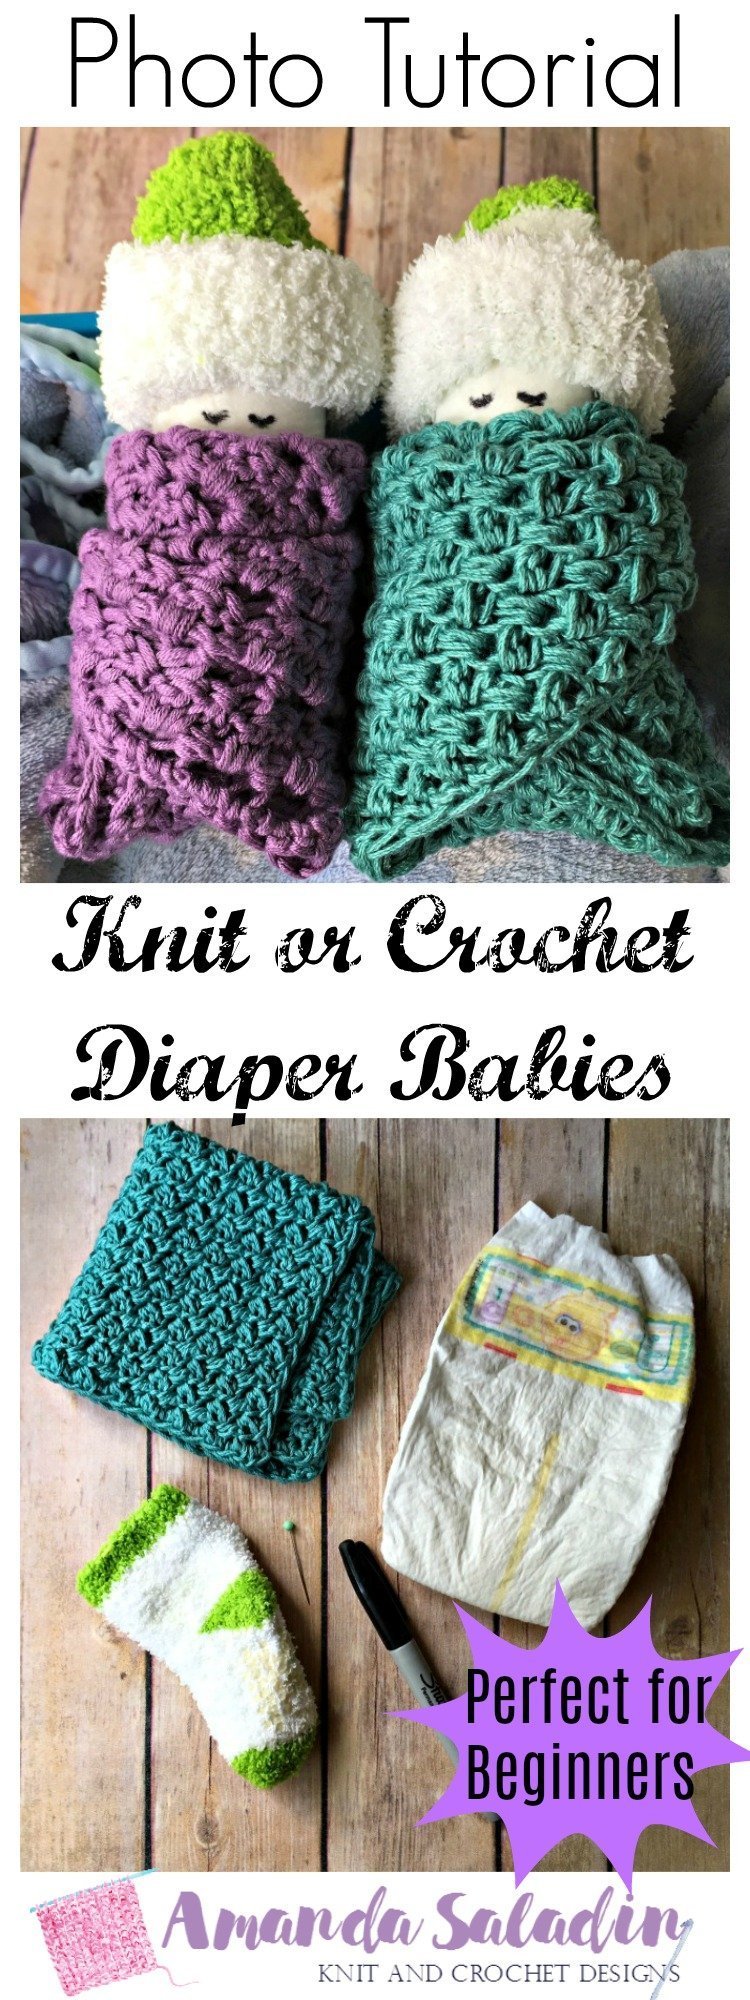 Create a unique baby shower gift with these handmade knit or crochet diaper babies. Full tutorial included!